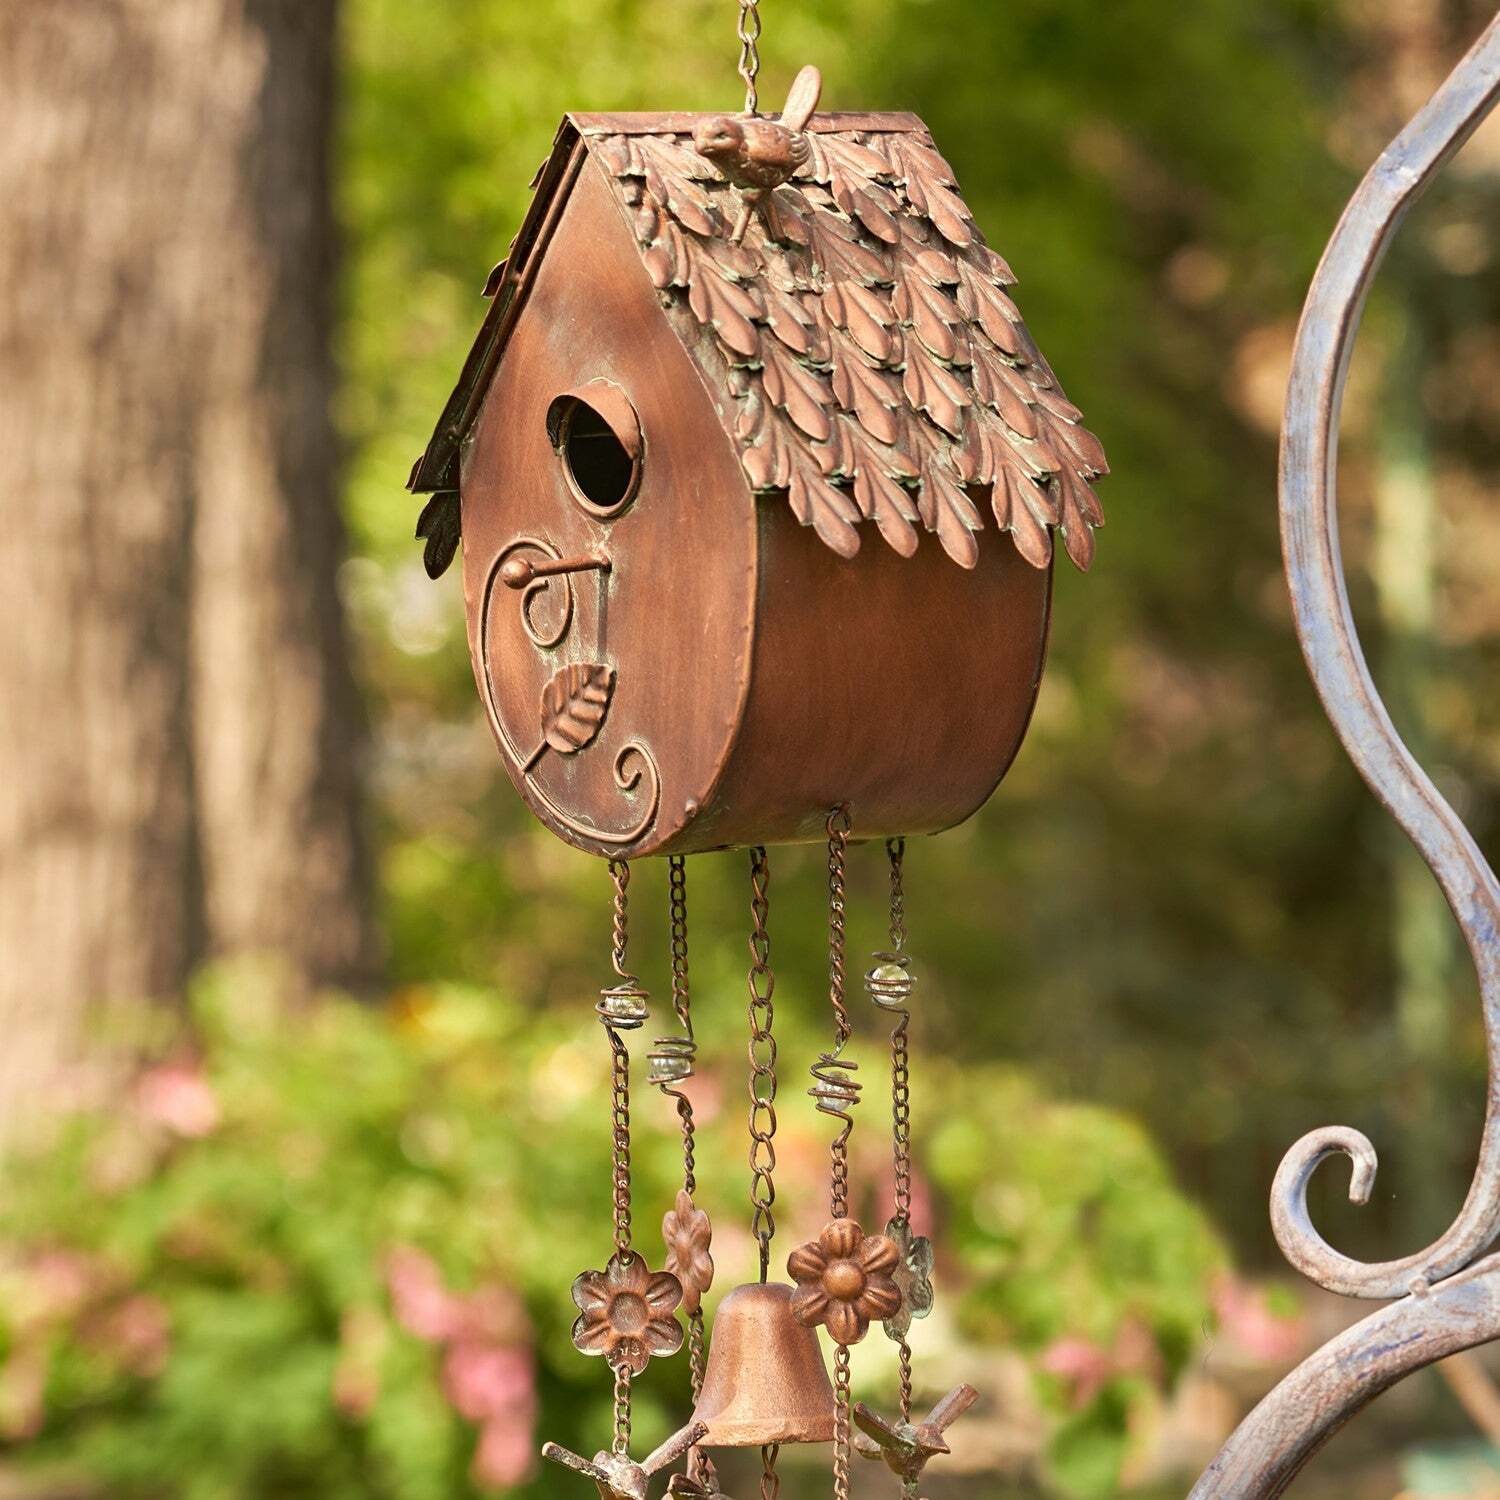 Antique Copper Hanging Birdhouse Wind Chime 